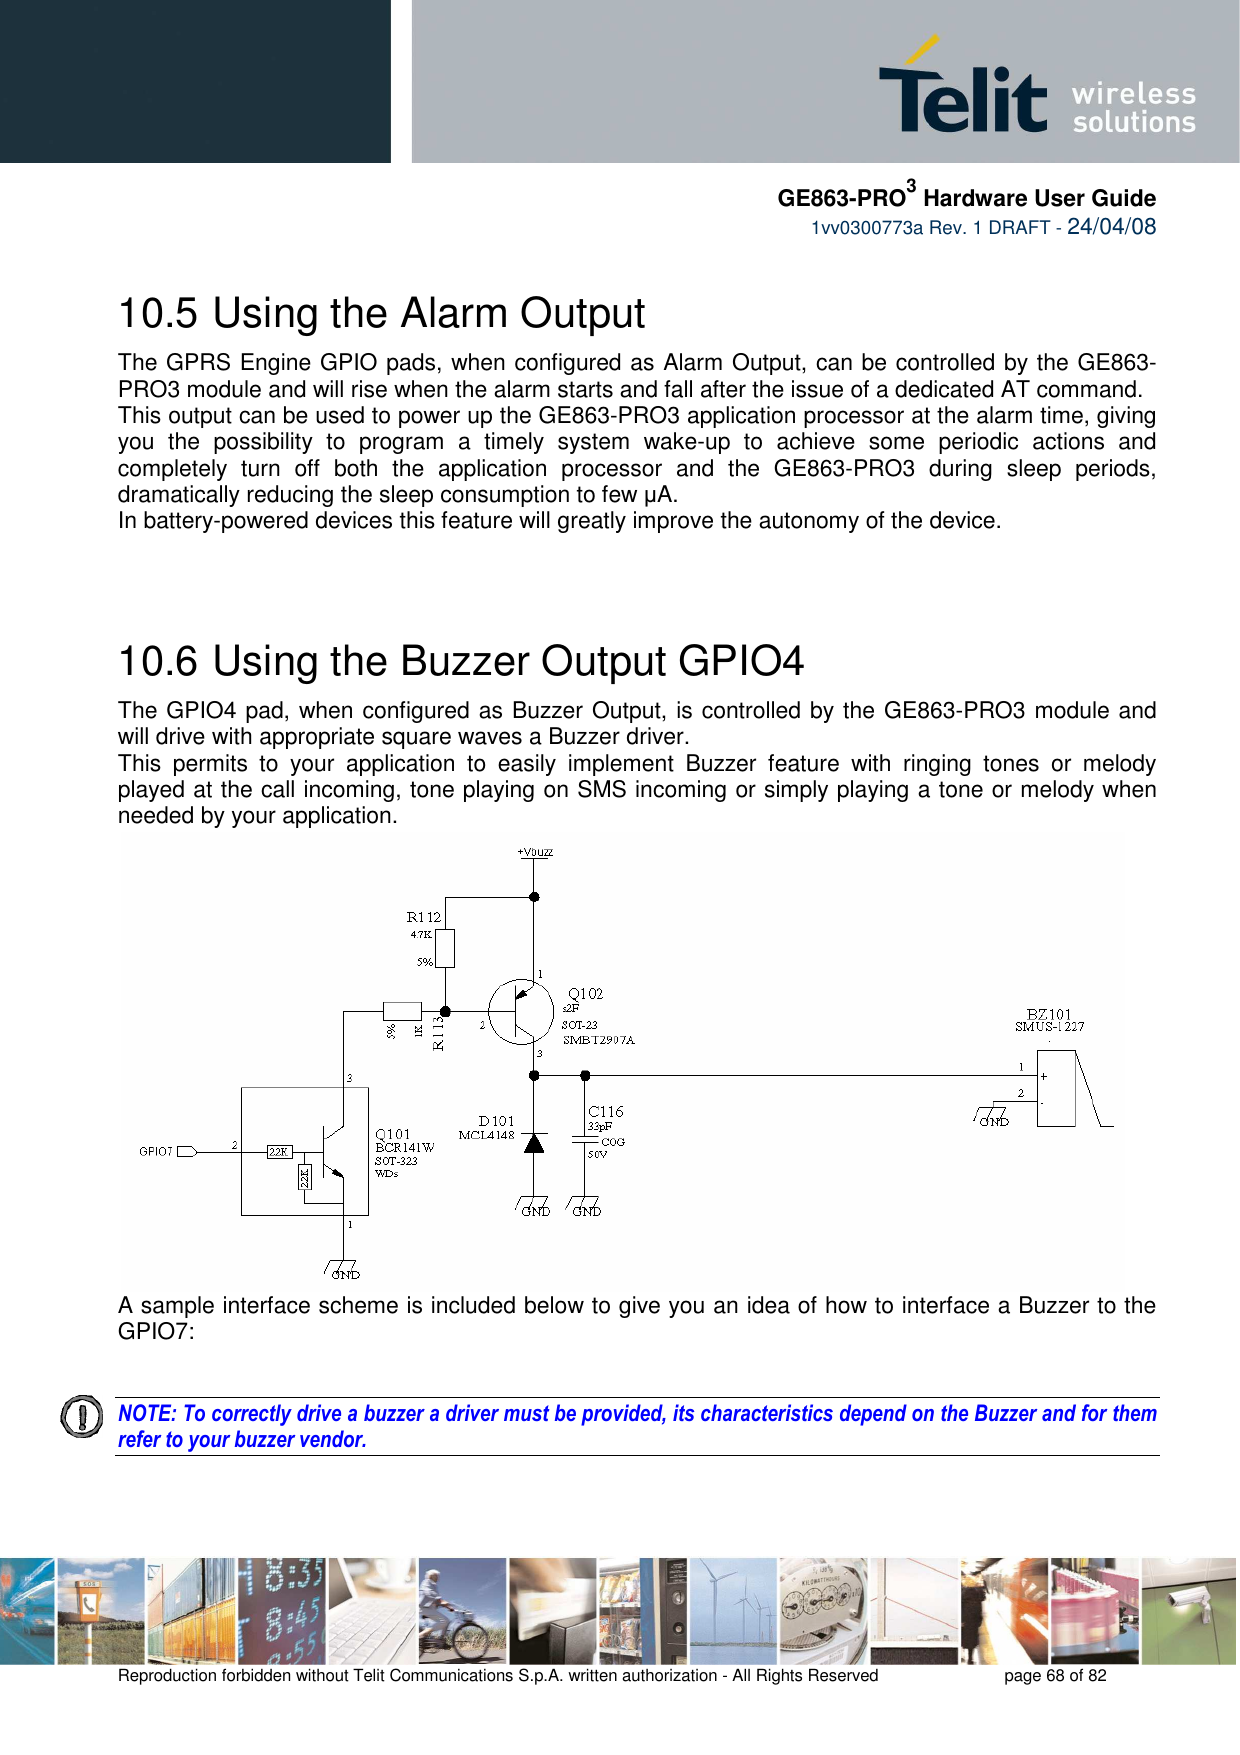     GE863-PRO3 Hardware User Guide  1vv0300773a Rev. 1 DRAFT - 24/04/08    Reproduction forbidden without Telit Communications S.p.A. written authorization - All Rights Reserved    page 68 of 82  10.5  Using the Alarm Output The GPRS Engine GPIO pads, when configured as Alarm Output, can be controlled by the GE863-PRO3 module and will rise when the alarm starts and fall after the issue of a dedicated AT command. This output can be used to power up the GE863-PRO3 application processor at the alarm time, giving you  the  possibility  to  program  a  timely  system  wake-up  to  achieve  some  periodic  actions  and completely  turn  off  both  the  application  processor  and  the  GE863-PRO3  during  sleep  periods, dramatically reducing the sleep consumption to few µA. In battery-powered devices this feature will greatly improve the autonomy of the device.   10.6  Using the Buzzer Output GPIO4 The GPIO4 pad, when configured as Buzzer Output, is controlled by the GE863-PRO3 module and will drive with appropriate square waves a Buzzer driver. This  permits  to  your  application  to  easily  implement  Buzzer  feature  with  ringing  tones  or  melody played at the call incoming, tone playing on SMS incoming or simply playing a tone or melody when needed by your application. A sample interface scheme is included below to give you an idea of how to interface a Buzzer to the GPIO7:   NOTE: To correctly drive a buzzer a driver must be provided, its characteristics depend on the Buzzer and for them refer to your buzzer vendor.   